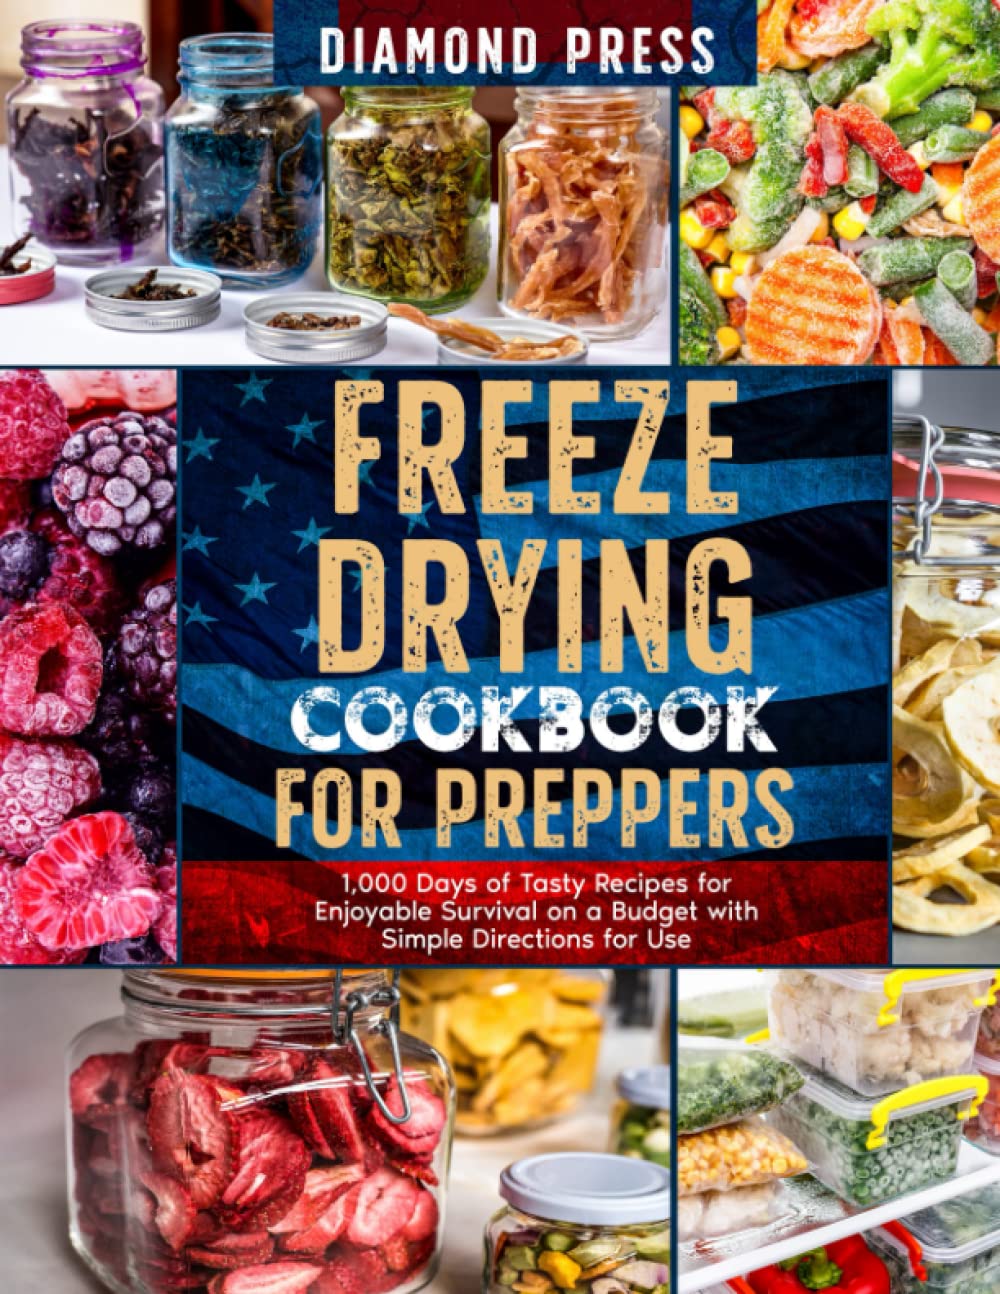 Freeze Drying Cookbook For Preppers: 1,000 Days of Tasty Recipes for Enjoyable Survival on a Budget with Simple Directions for Use